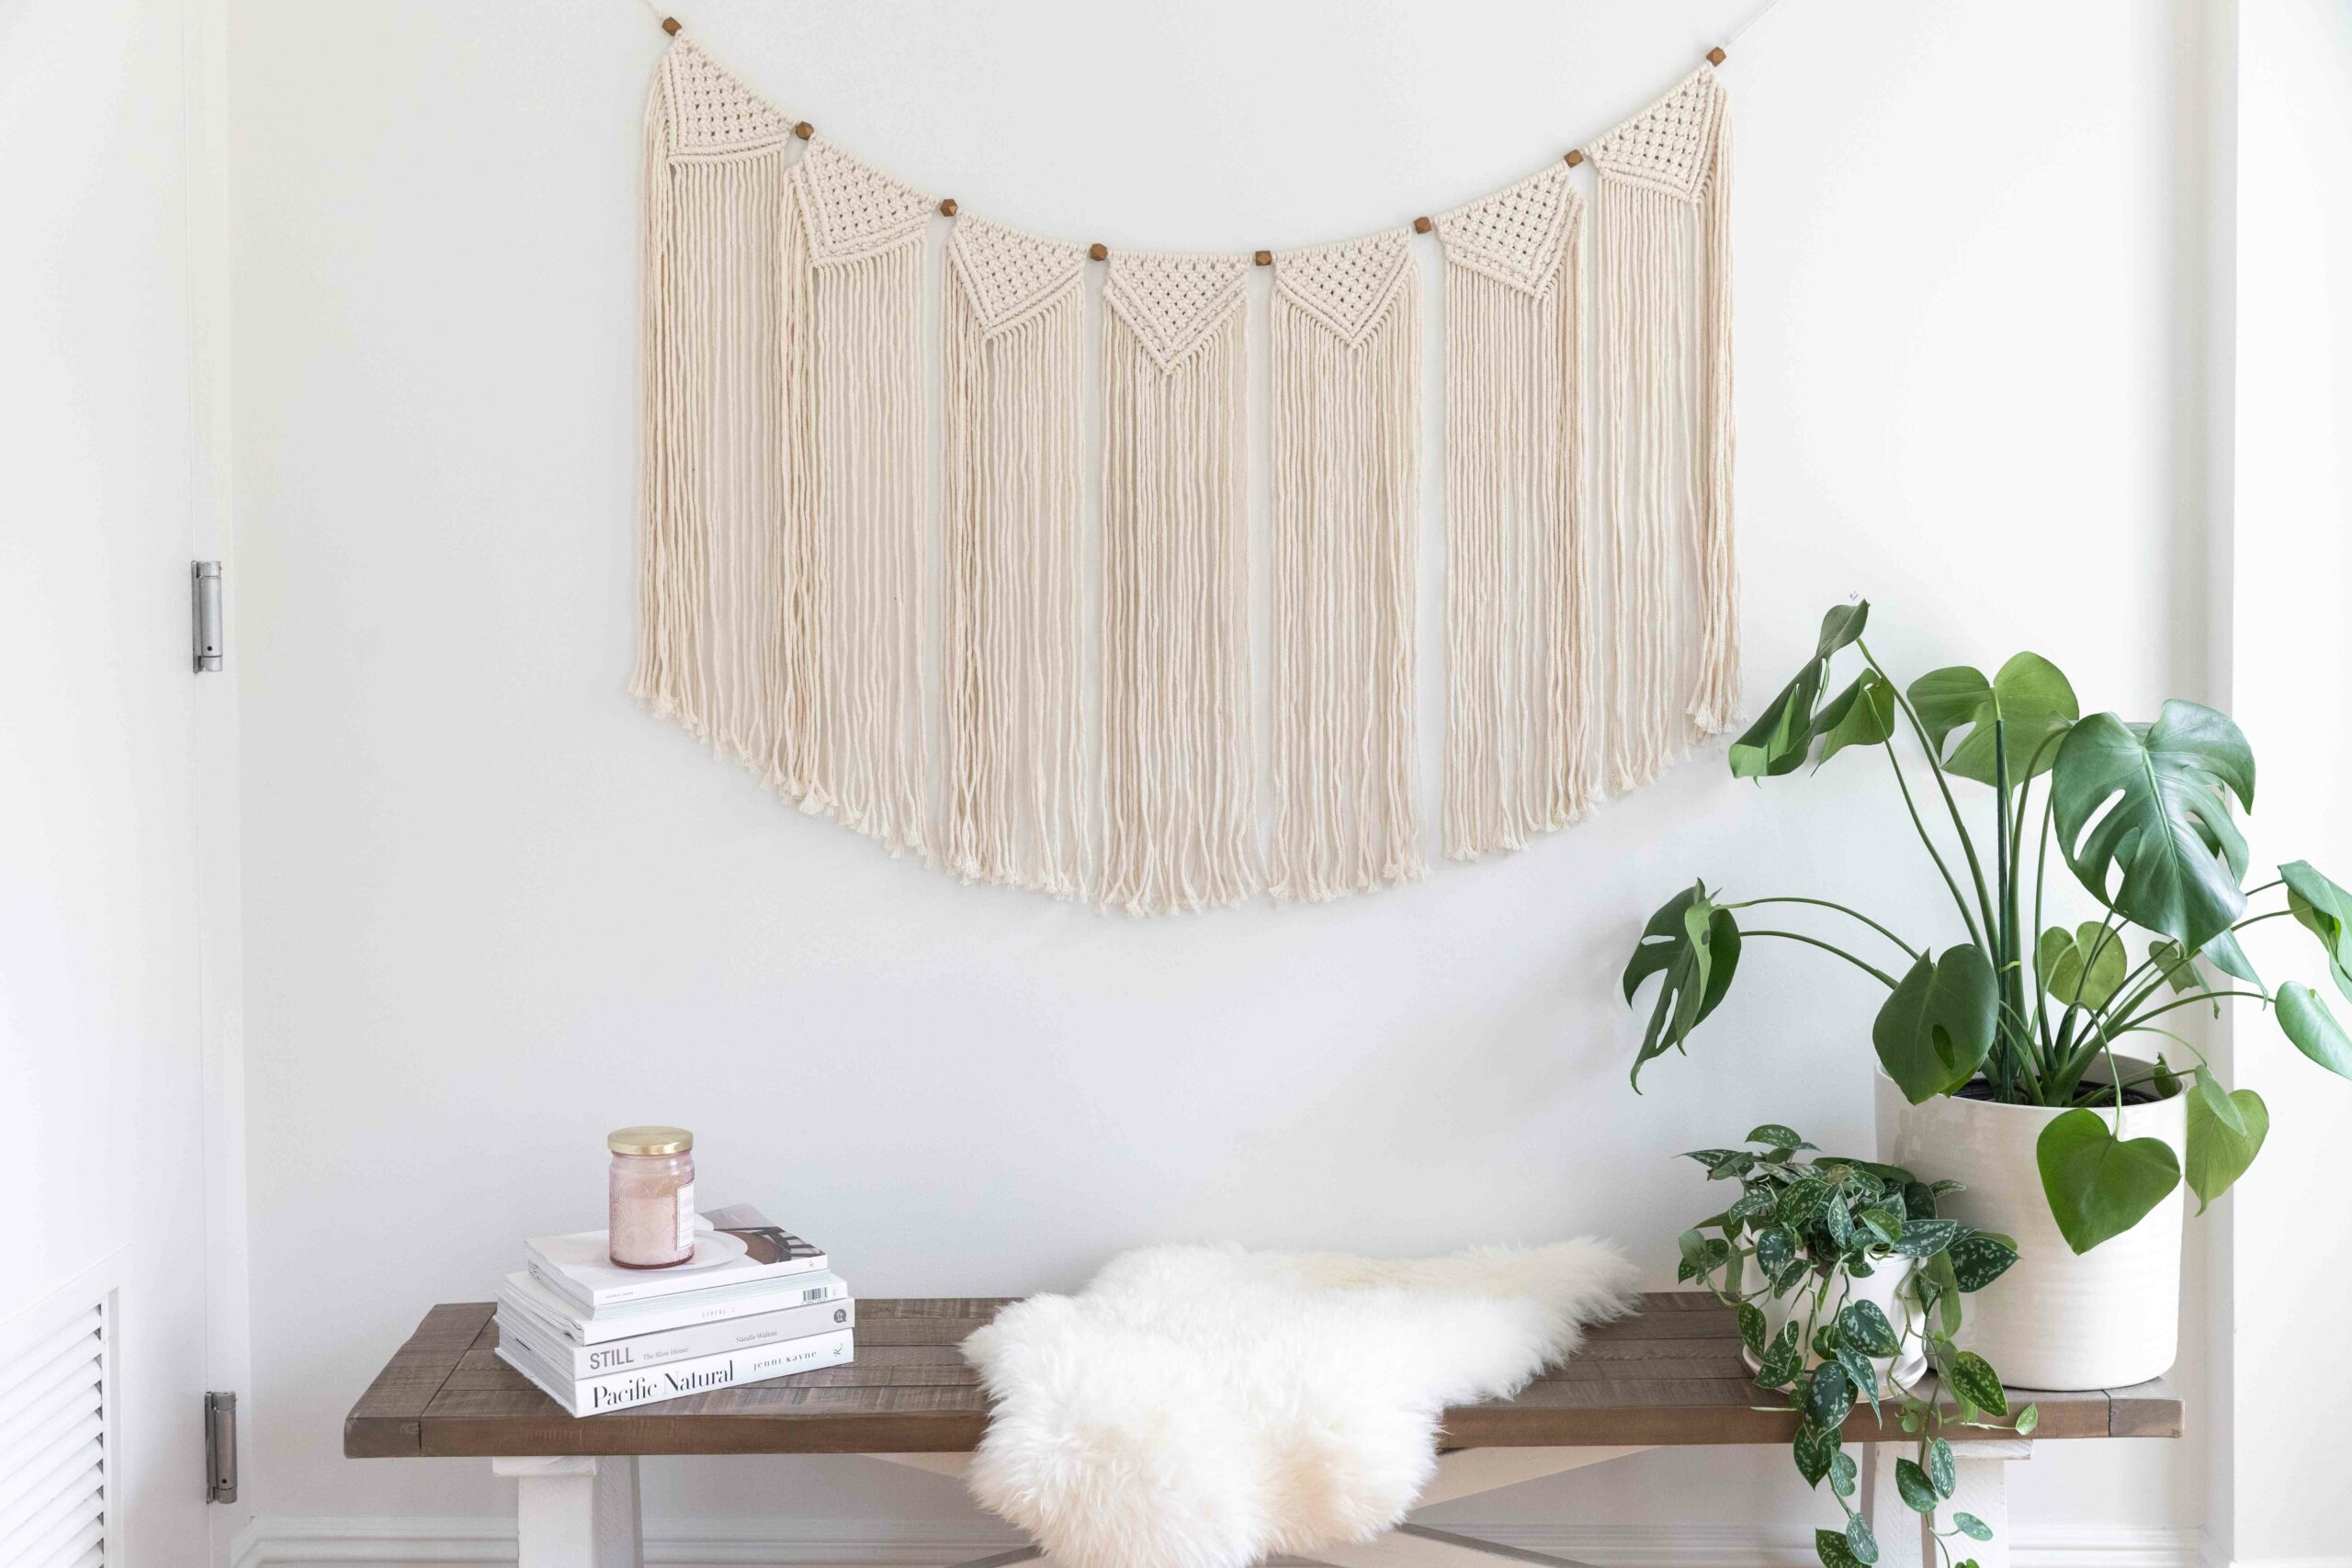 Consider Hanging Cloth as Your Office Wall Decor